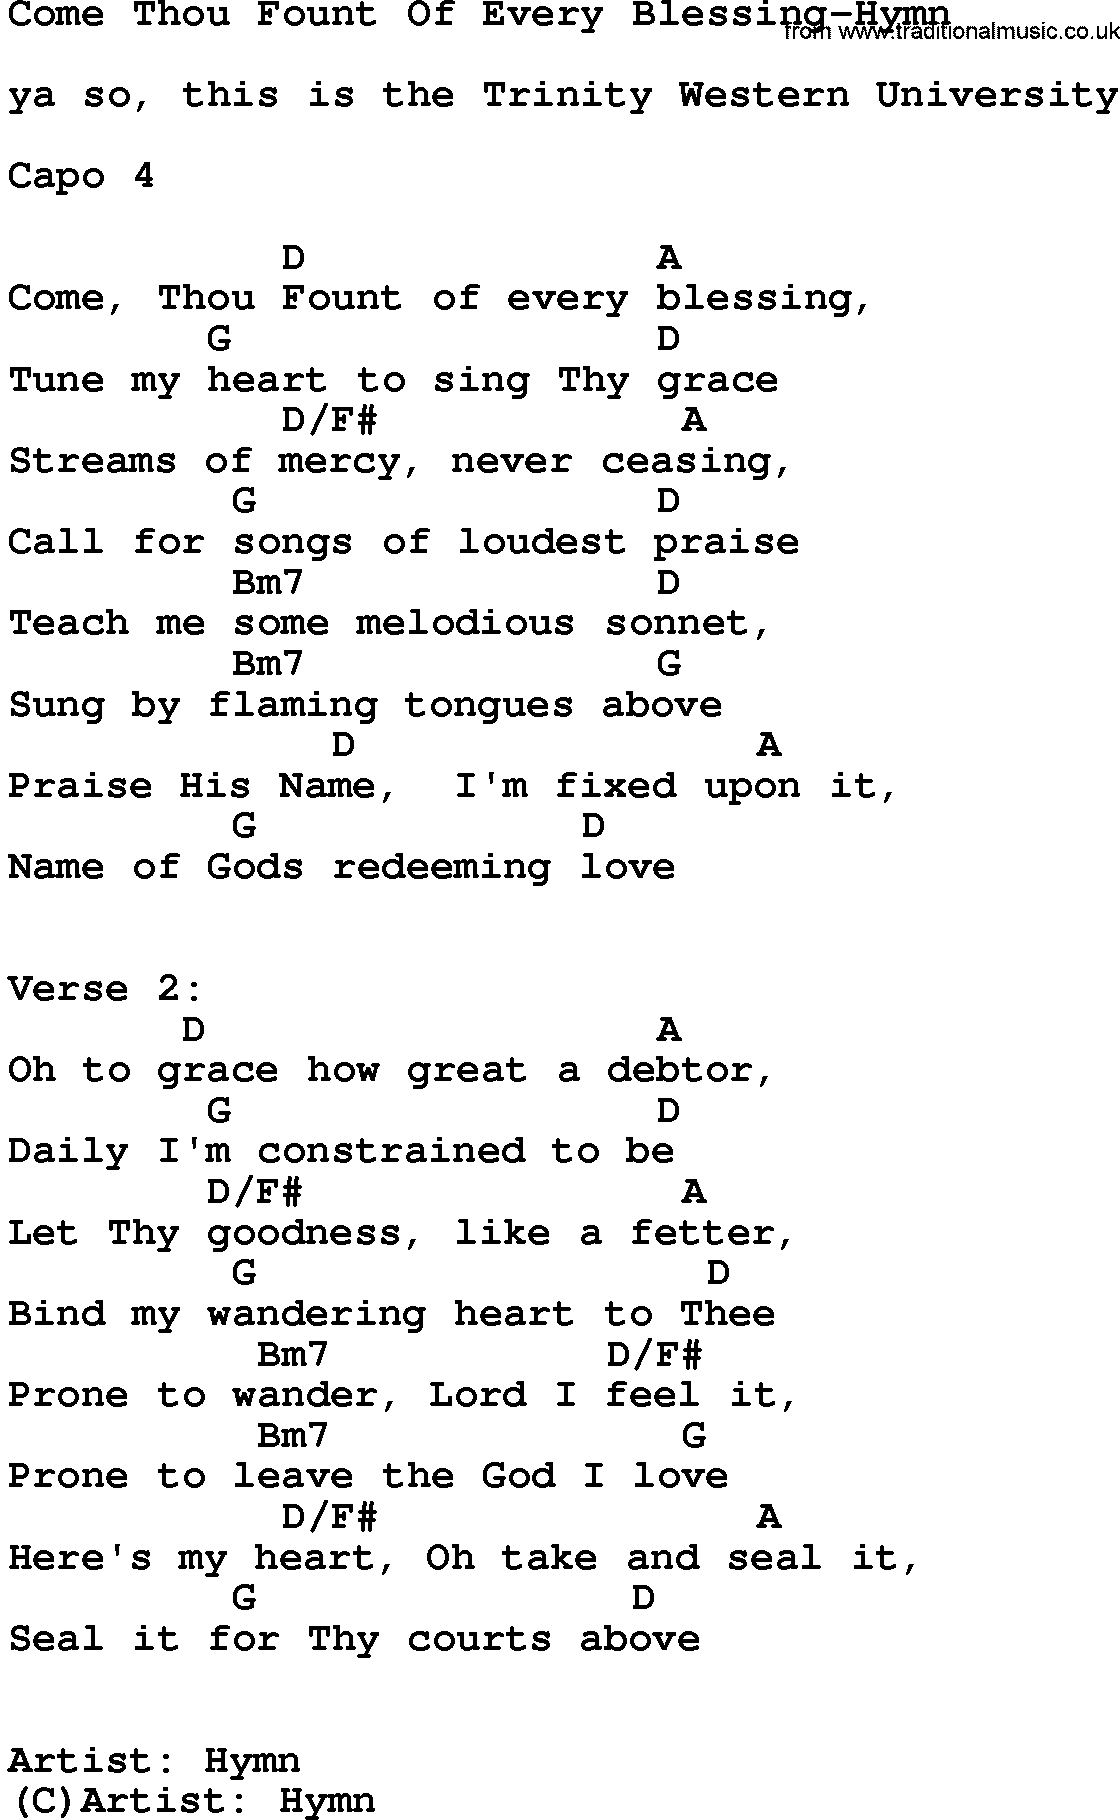 Gospel Song: Come Thou Fount Of Every Blessing-Hymn, lyrics and chords.